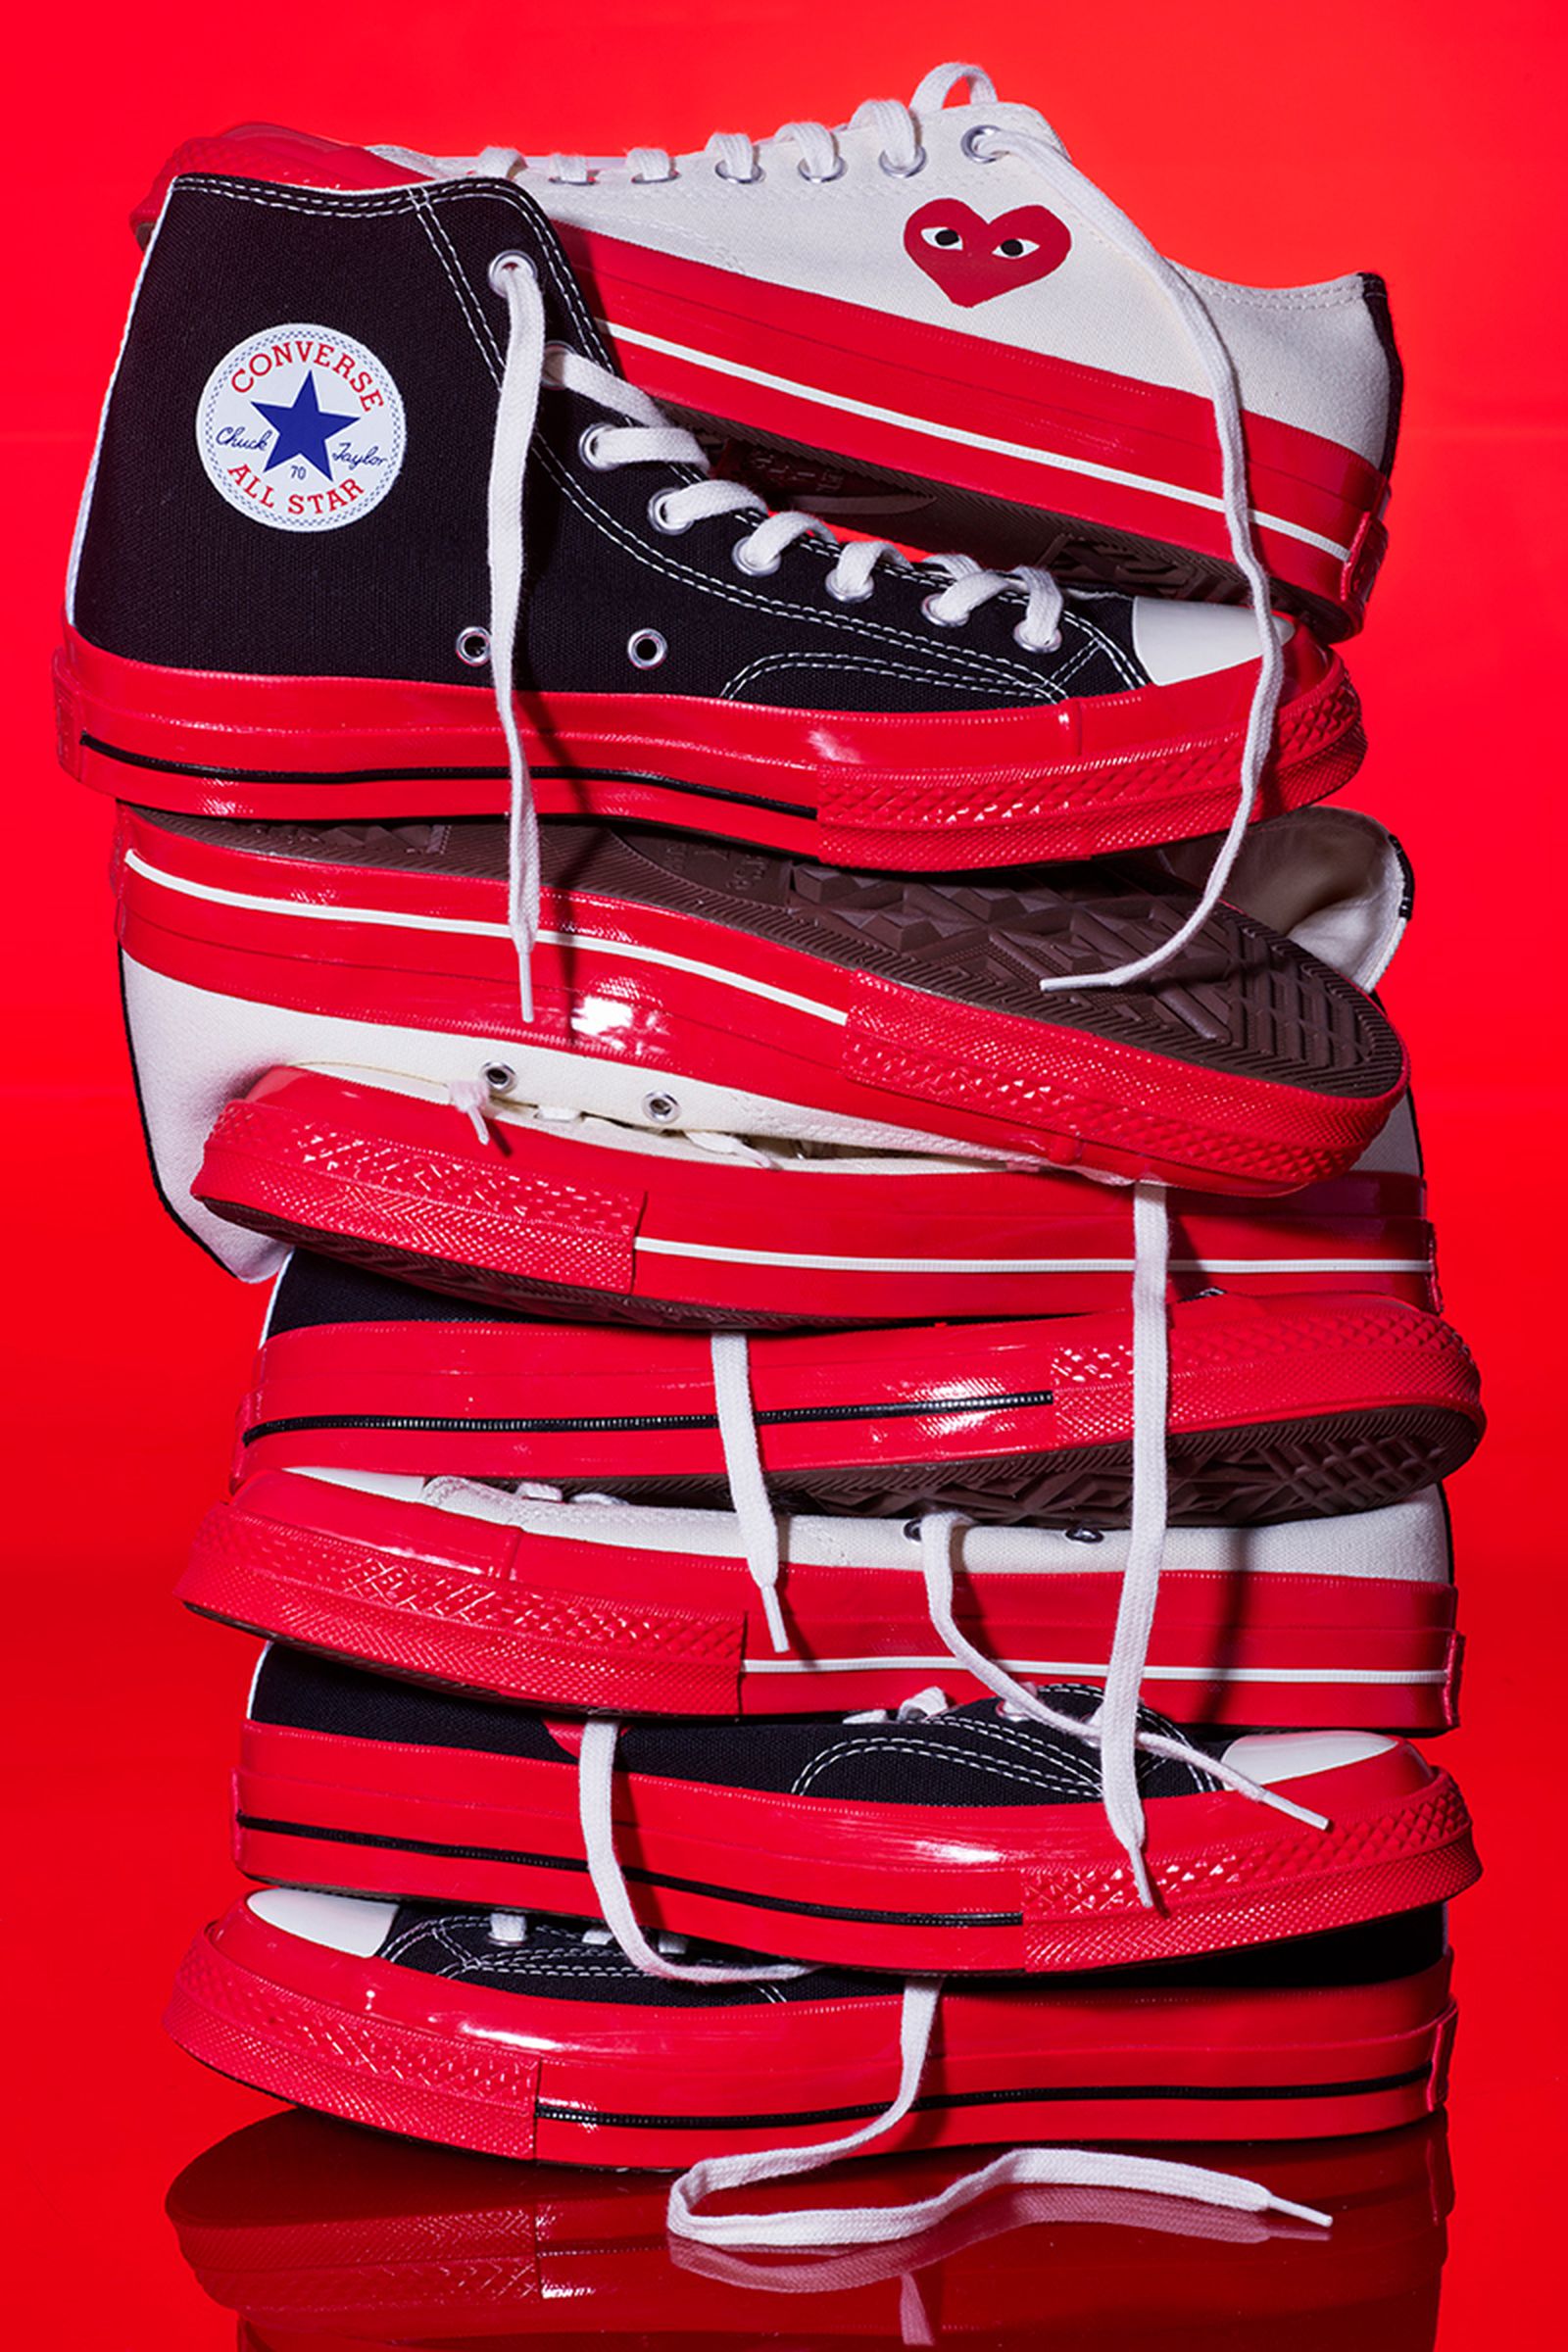 cdg-play-converse-chuck-70-red-release-date-price-6